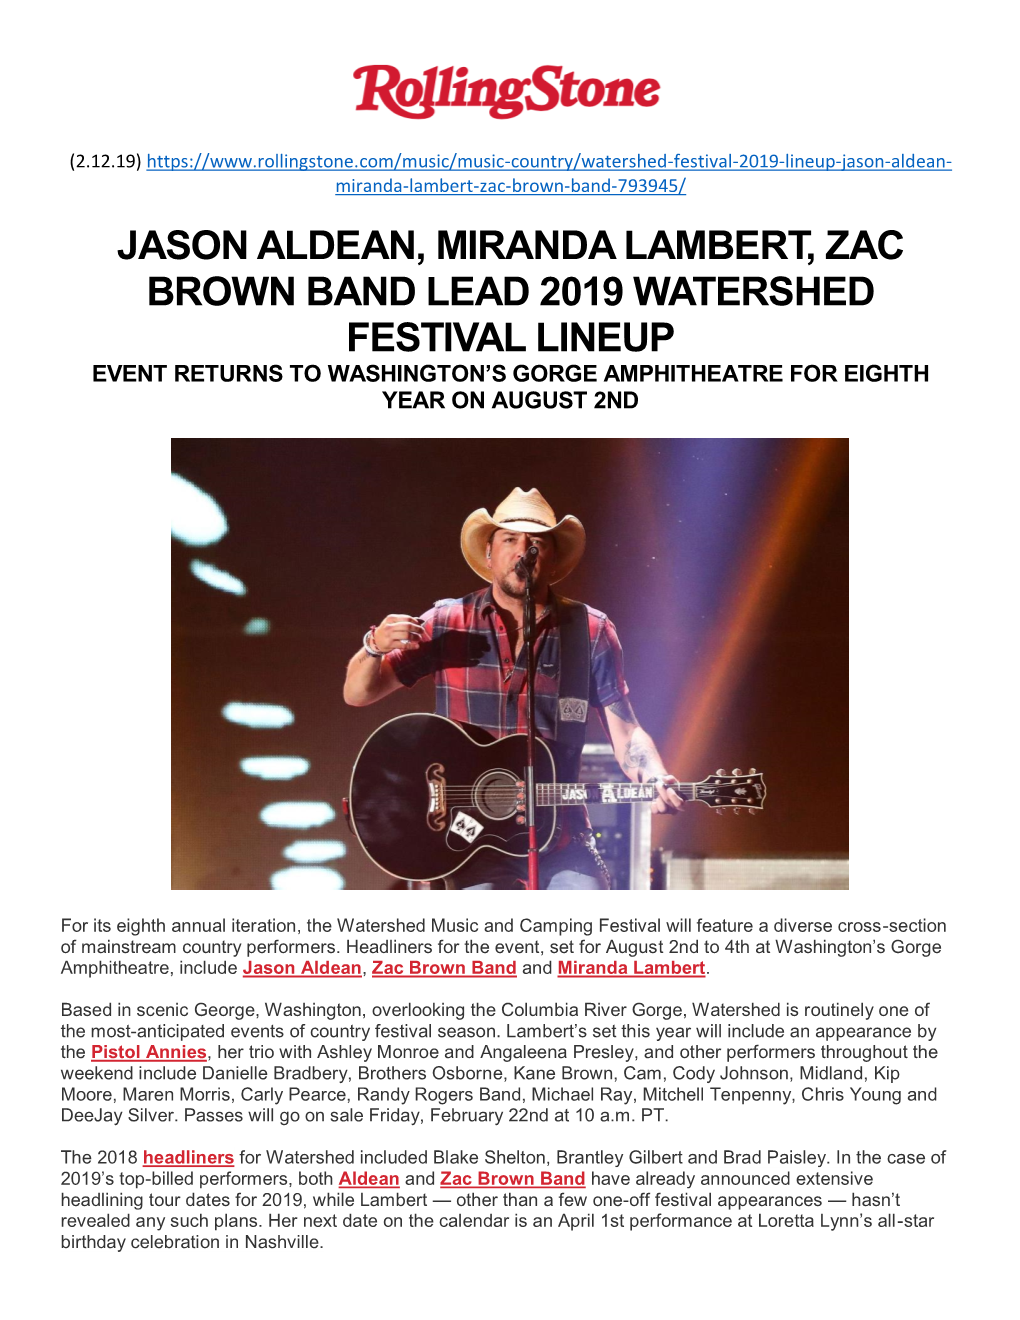 Jason Aldean, Miranda Lambert, Zac Brown Band Lead 2019 Watershed Festival Lineup Event Returns to Washington’S Gorge Amphitheatre for Eighth Year on August 2Nd